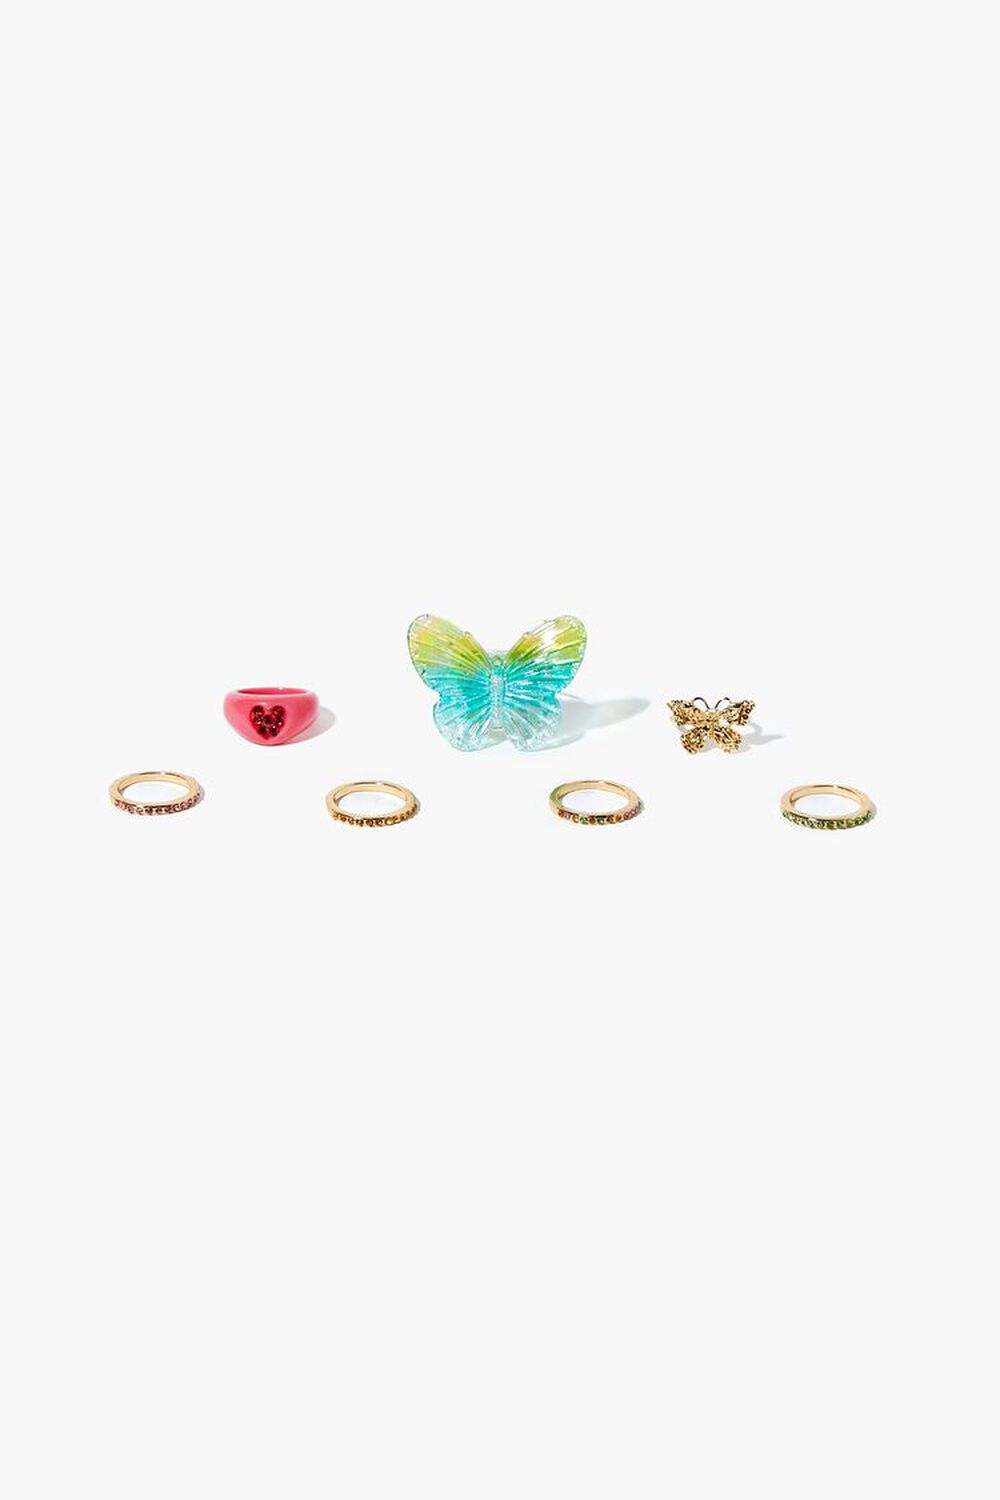 PINK/BLUE Butterfly & Cocktail Ring Set, image 1